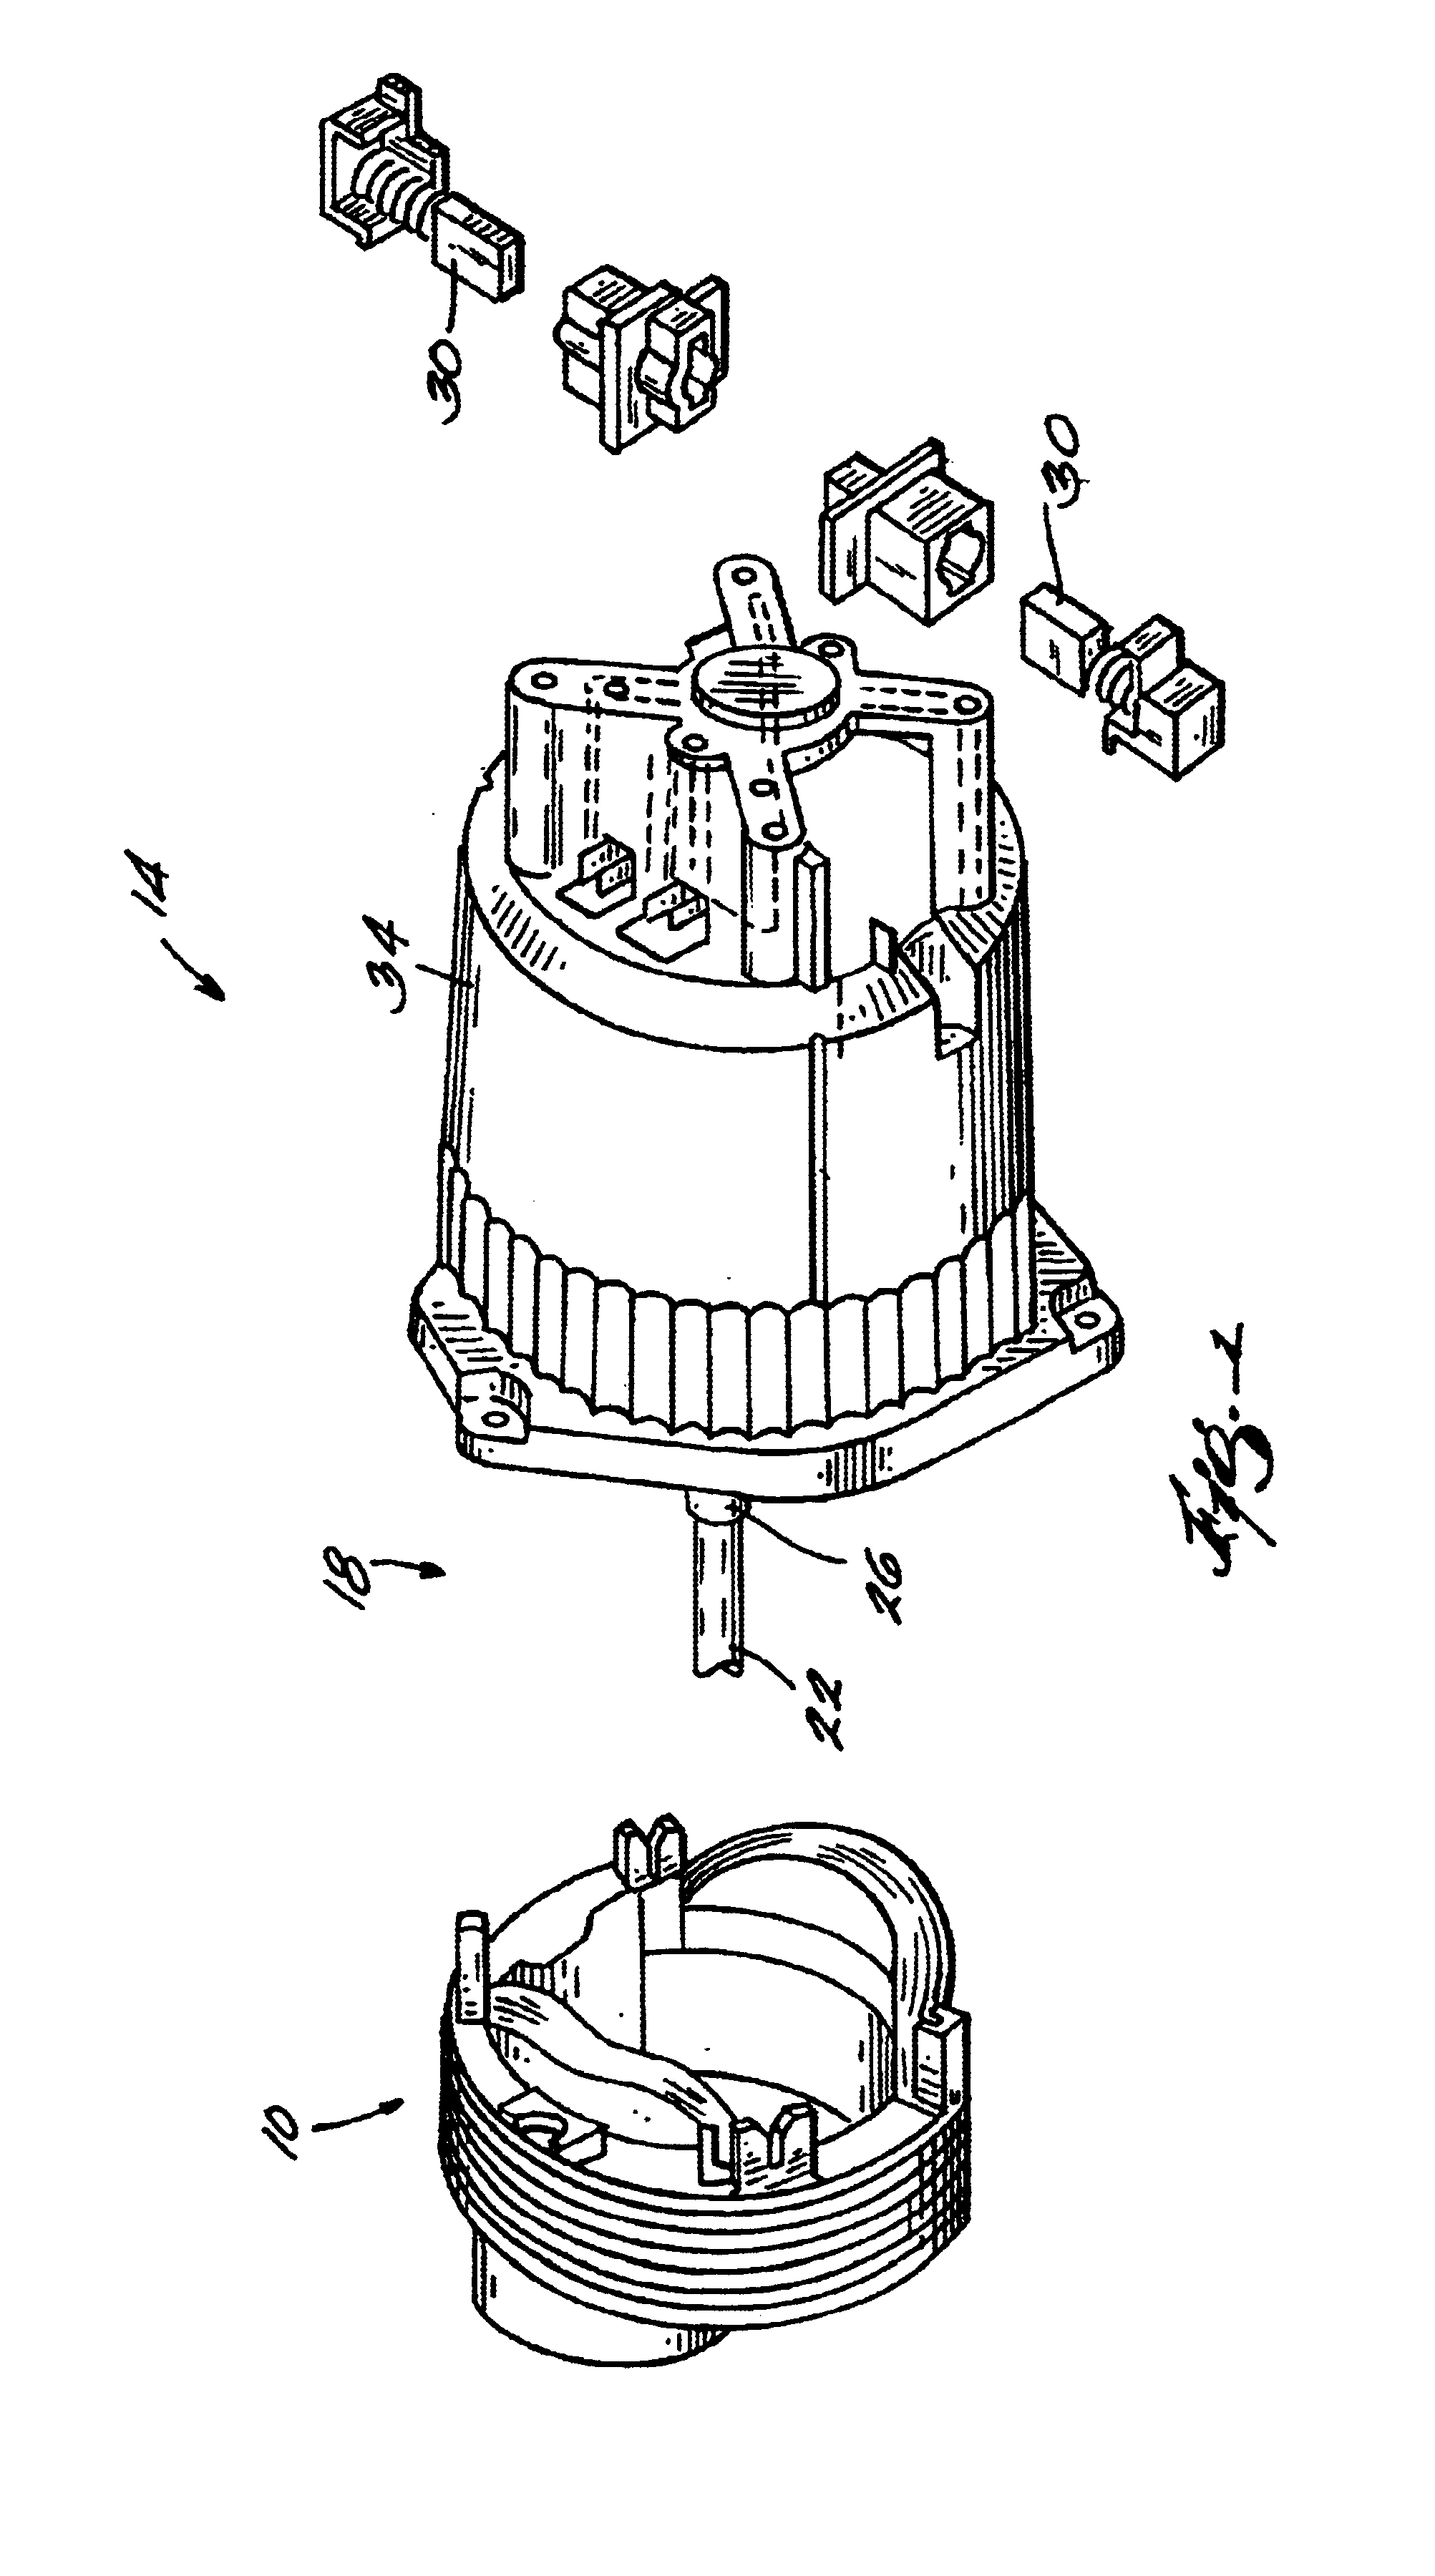 Field assembly and methods for assembling a field assembly